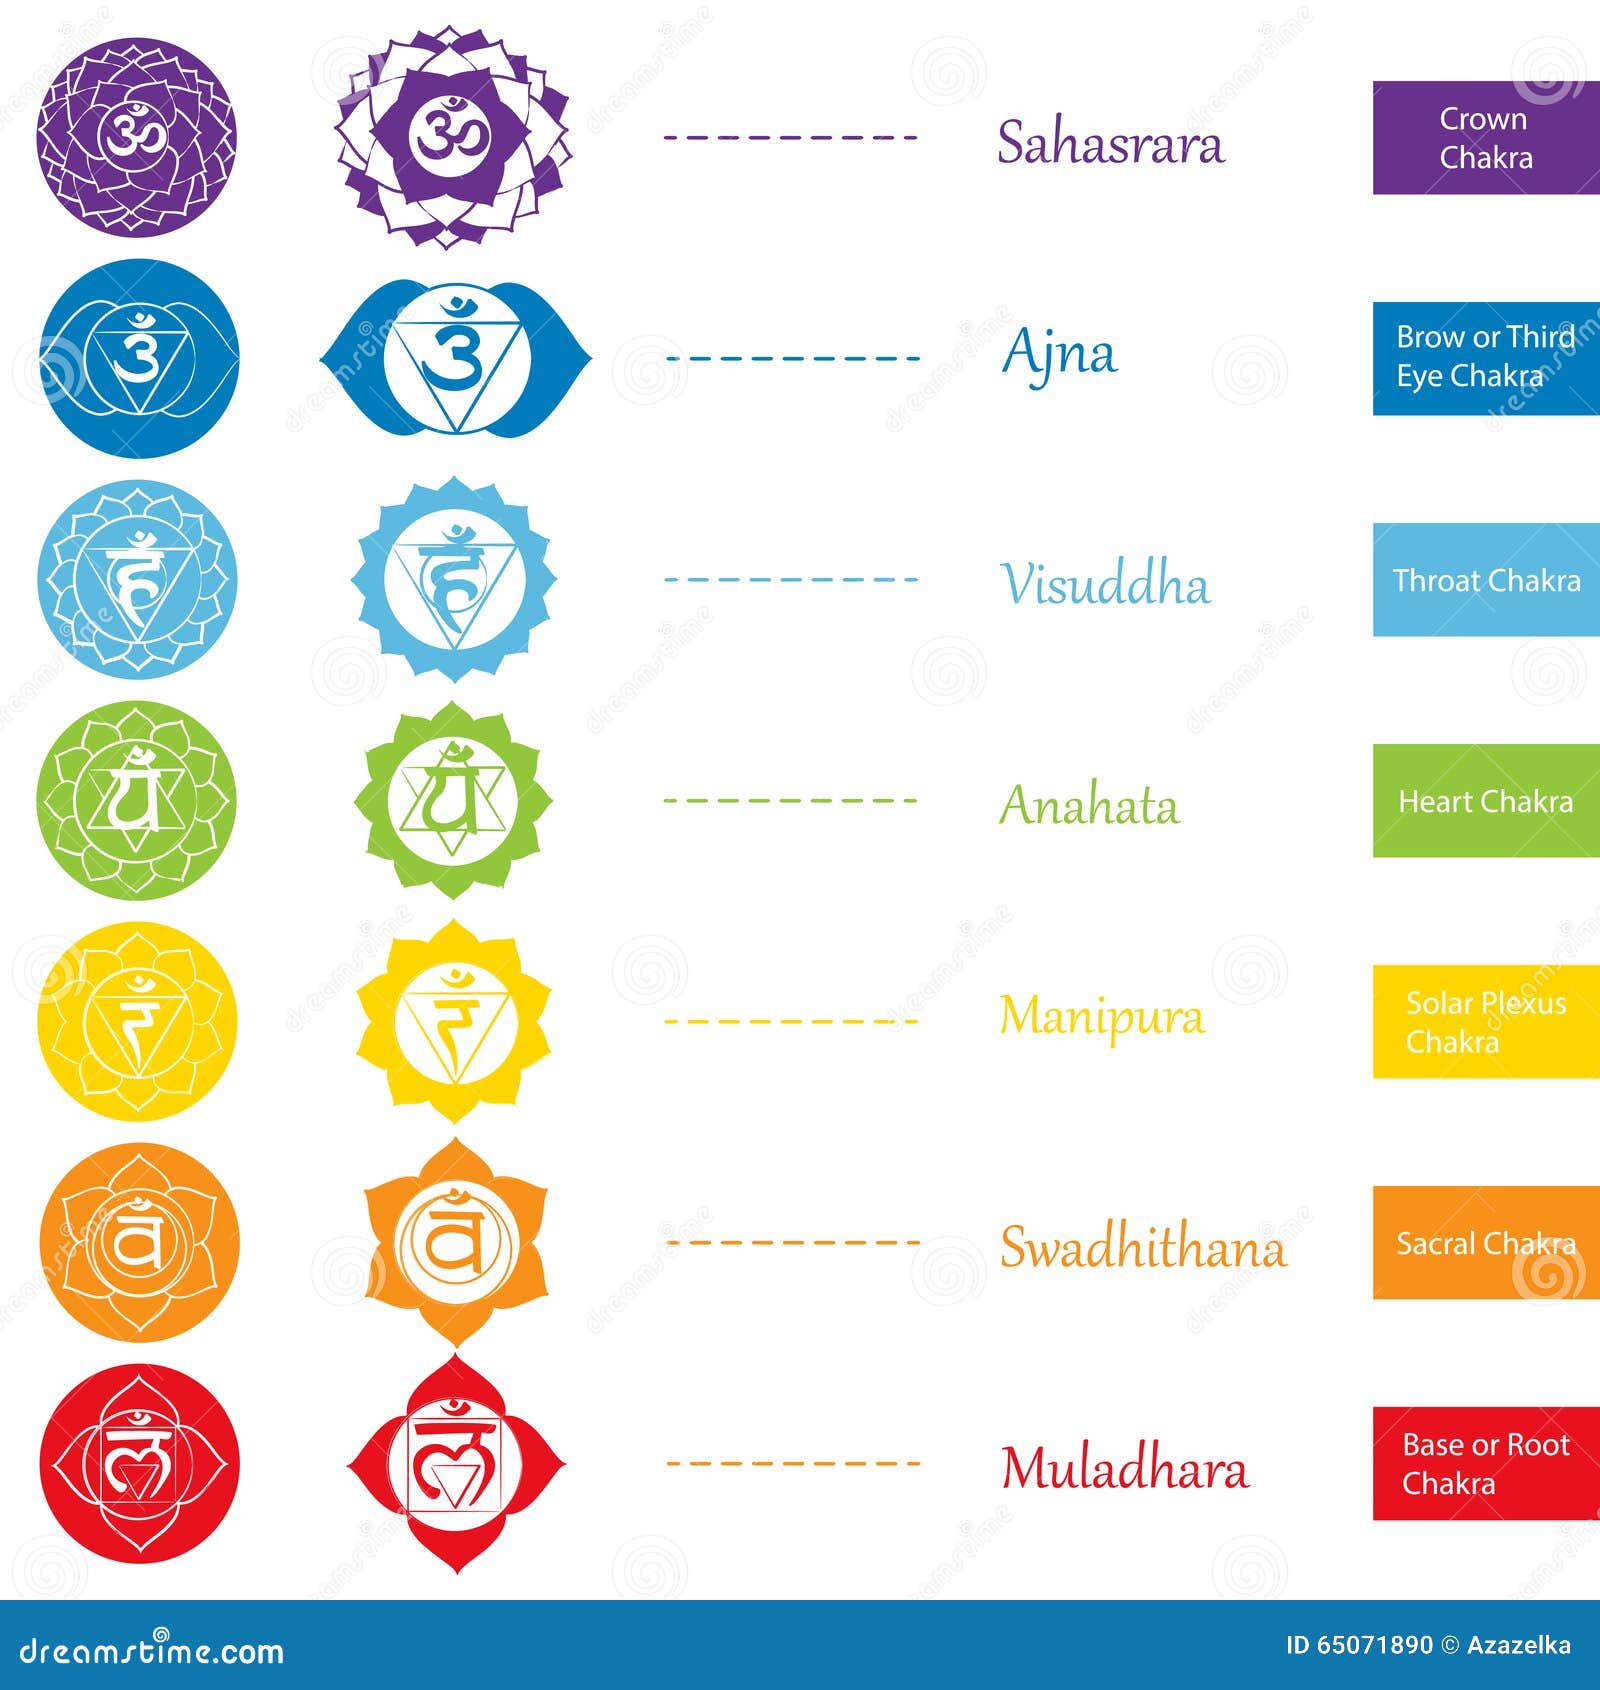 chakras icons . the concept of chakras used in hinduism, buddhism and ayurveda. for , associated with yoga and india. 